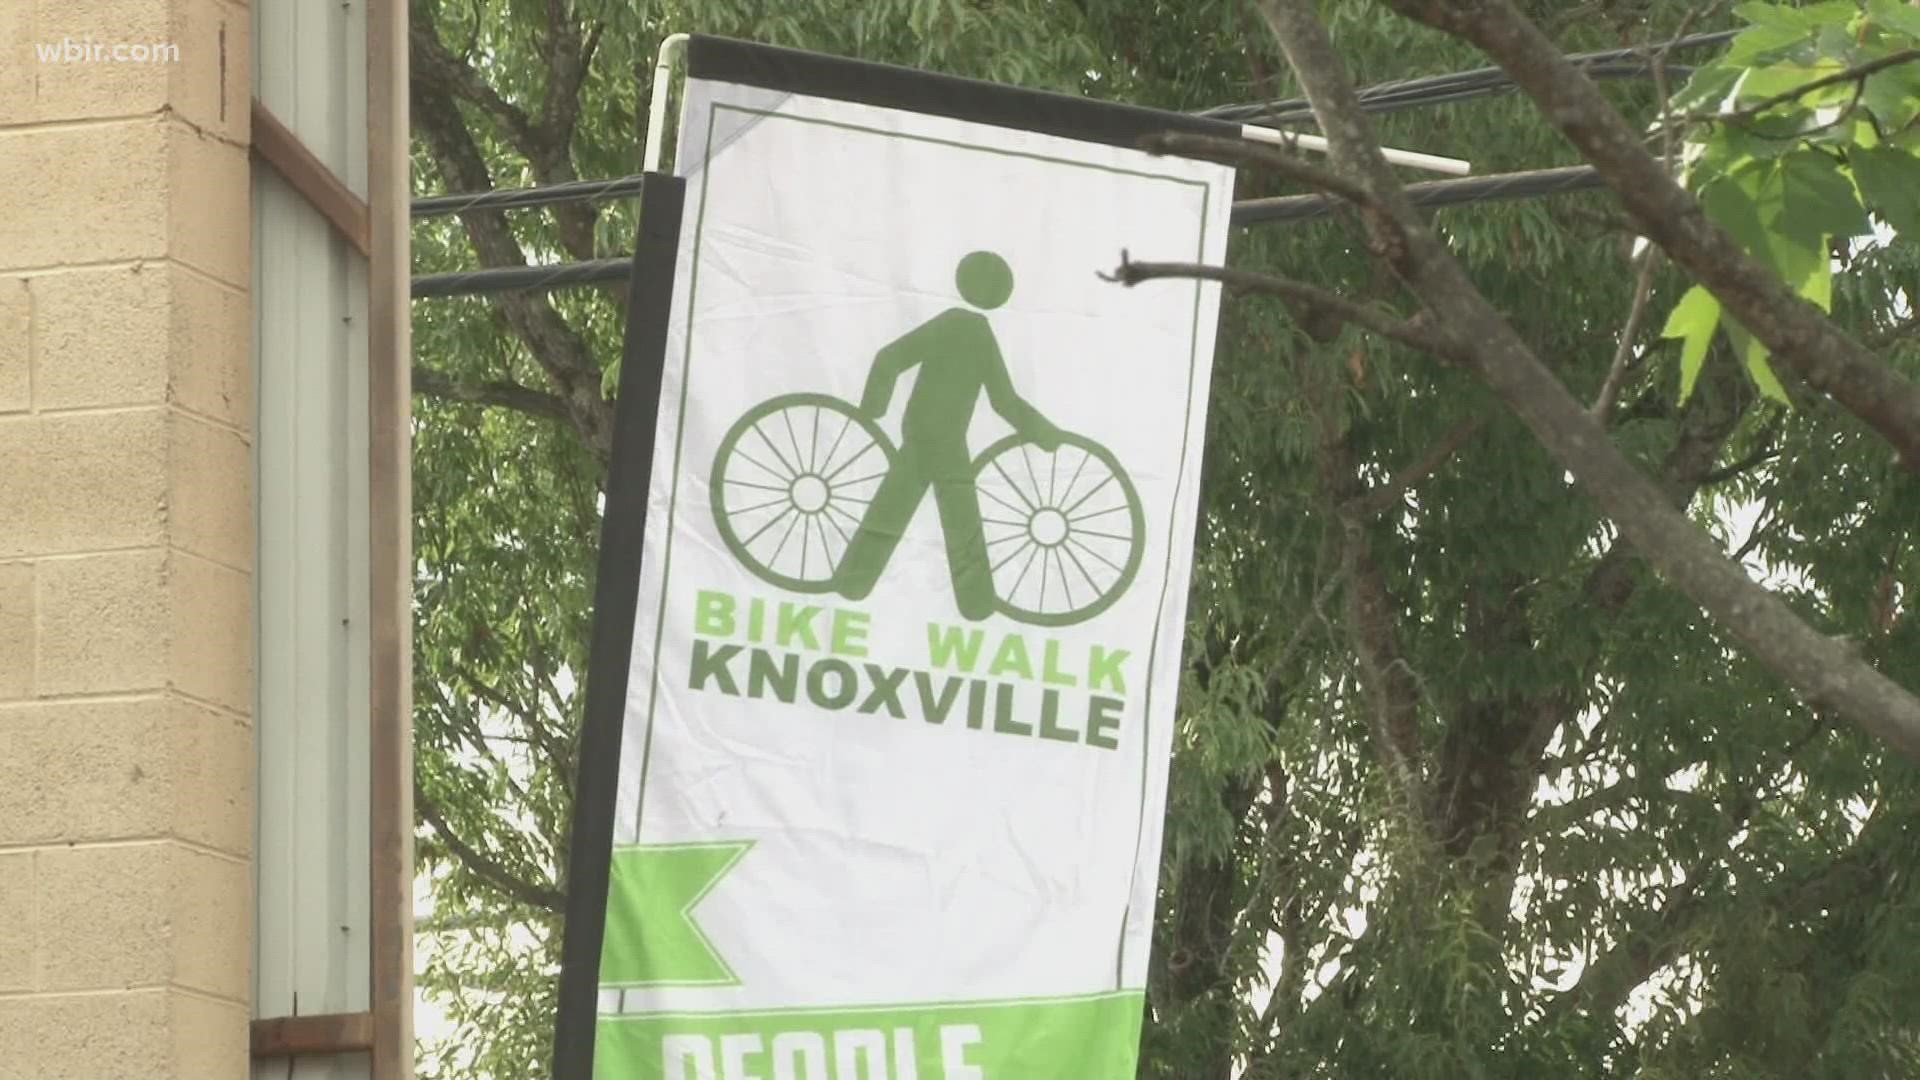 The non-profit, Bike Walk Knoxville, says changes to Knoxville that accommodated walkers and cyclists could bring benefits to everyone.